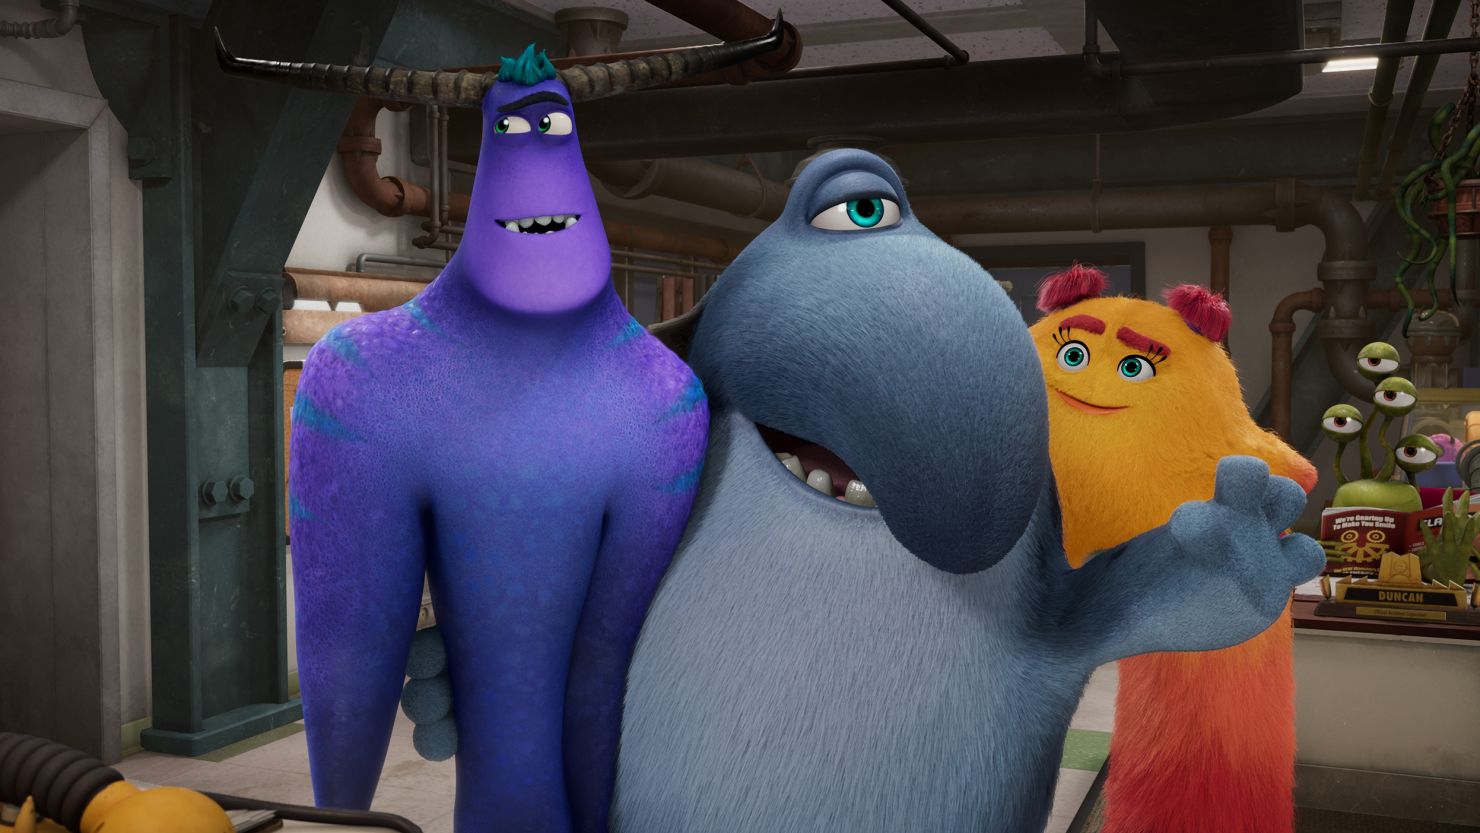 'Monsters at Work' begins right after the events in 'Monsters, Inc.,' premiering on Disney+.